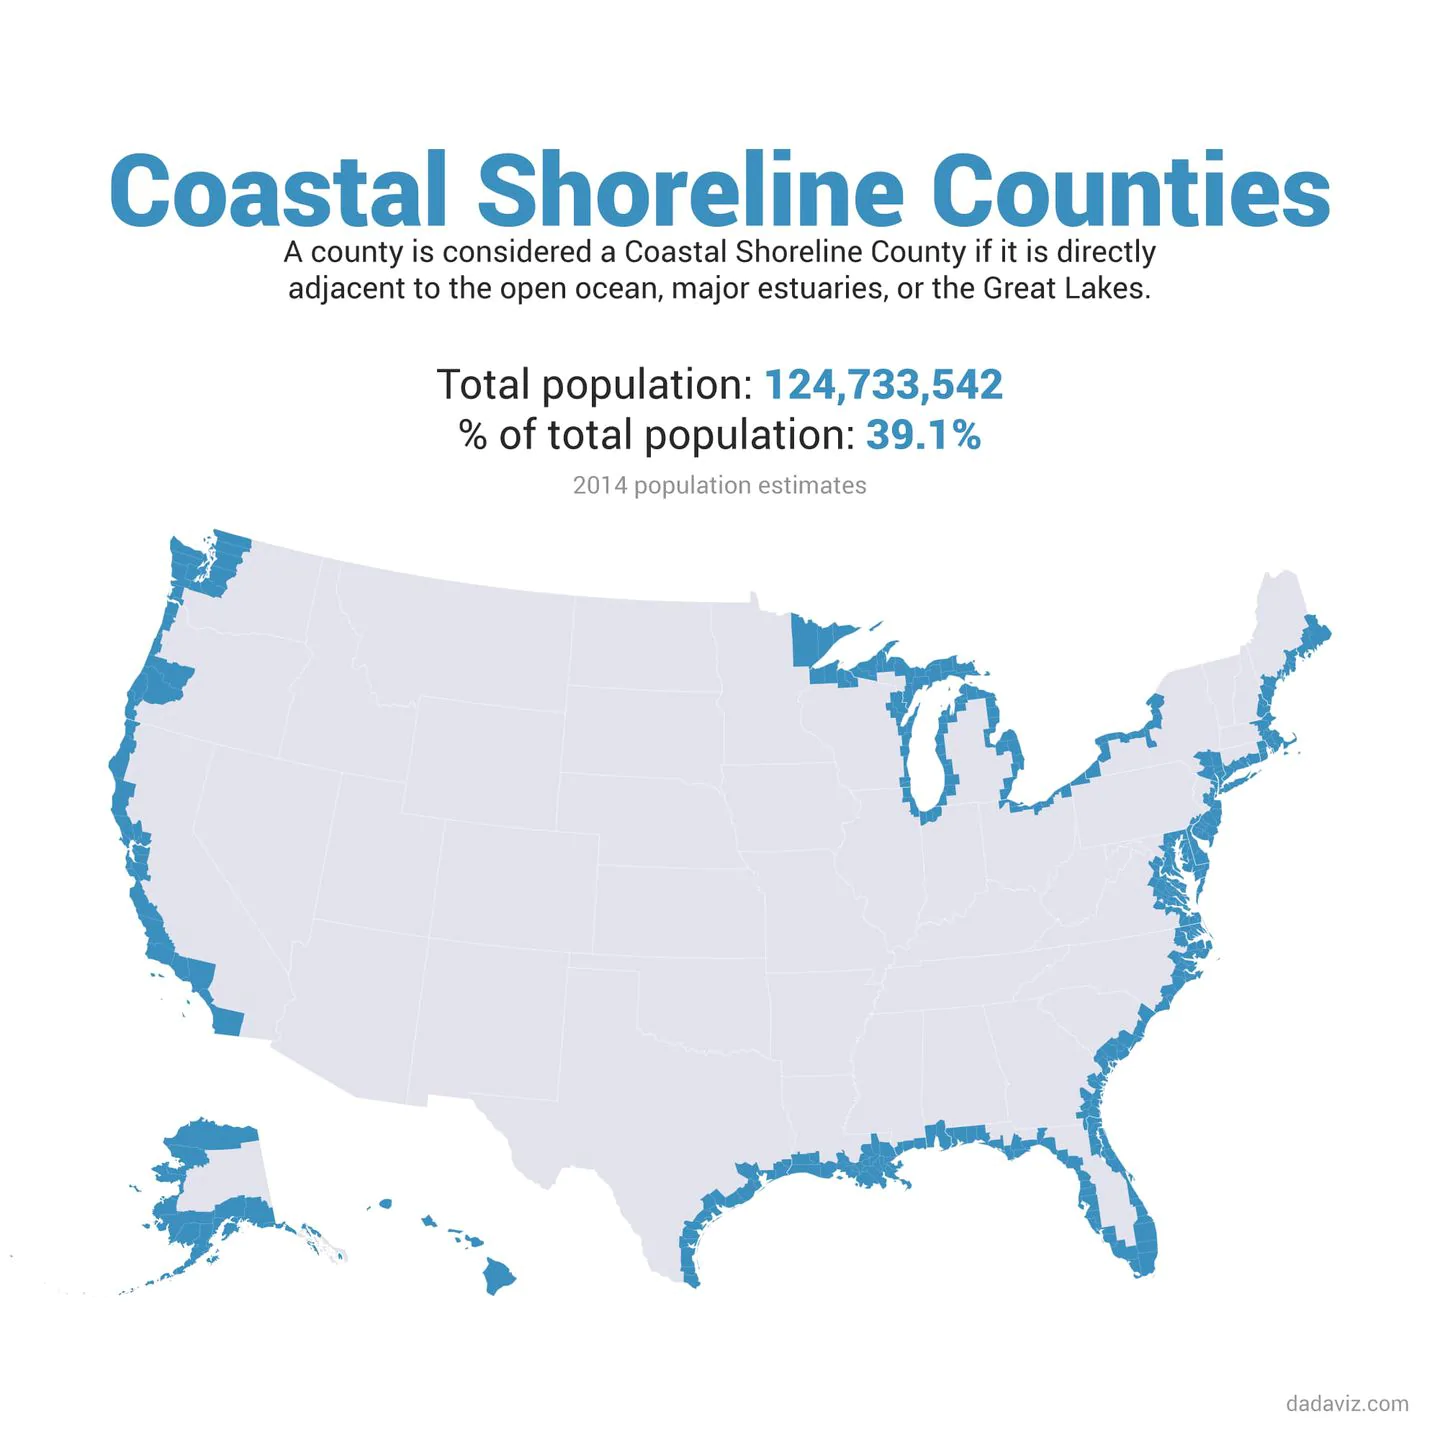 map of US coastal counties and their population